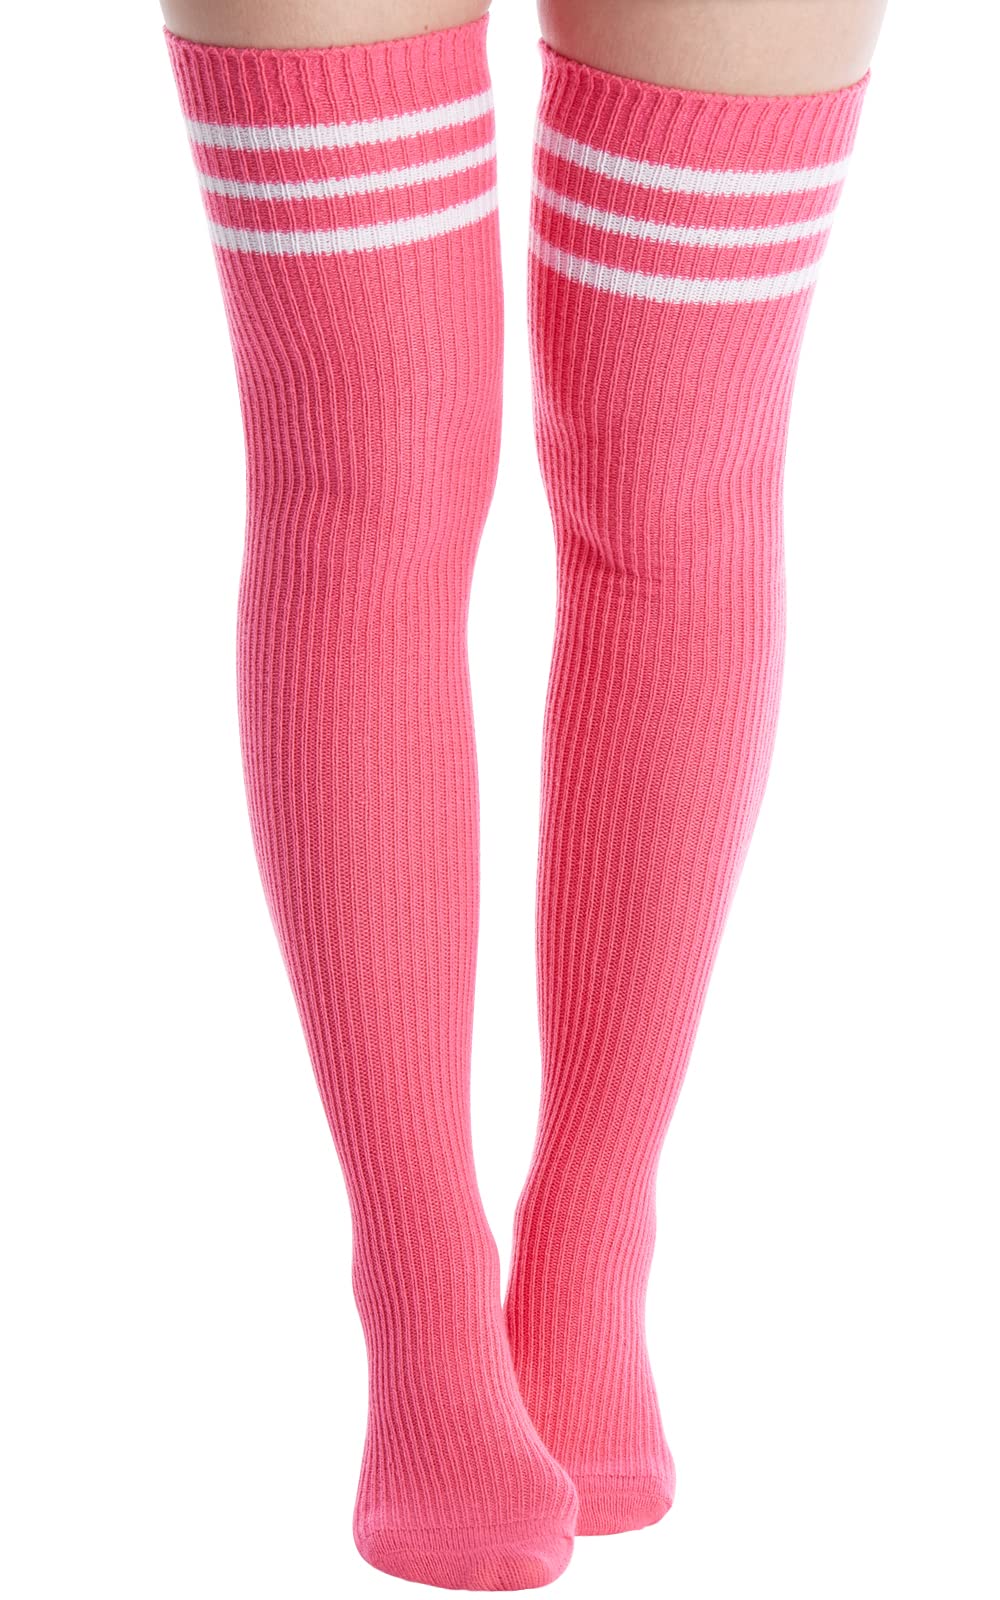 Extra Long Warm Knit Striped Thigh Highs Leg Warmers-Bubble Gum Pink & White Striped - Moon Wood